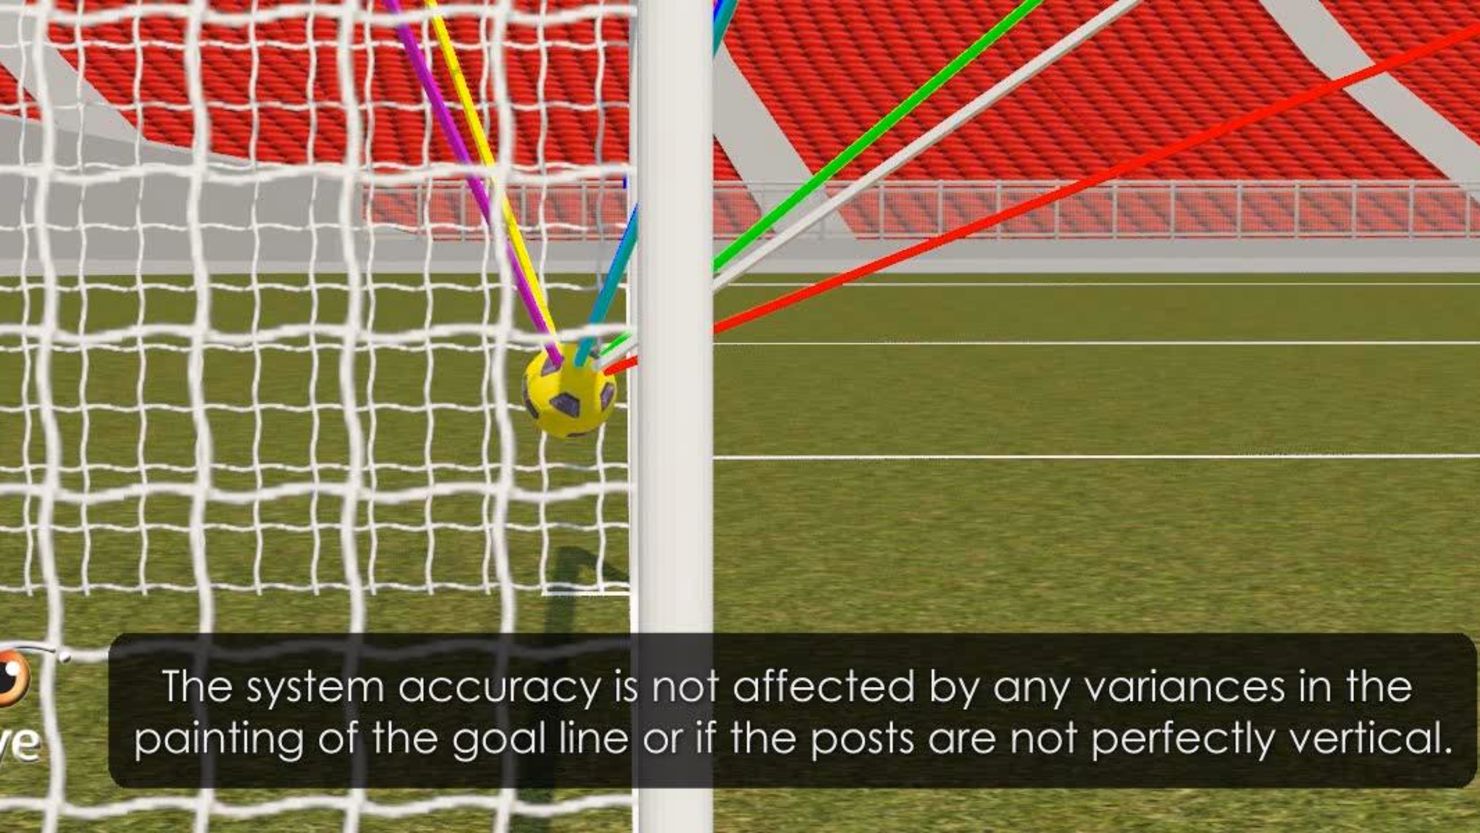 The Hawk-Eye system uses seven different cameras to track the ball and determine whether it has crossed the line